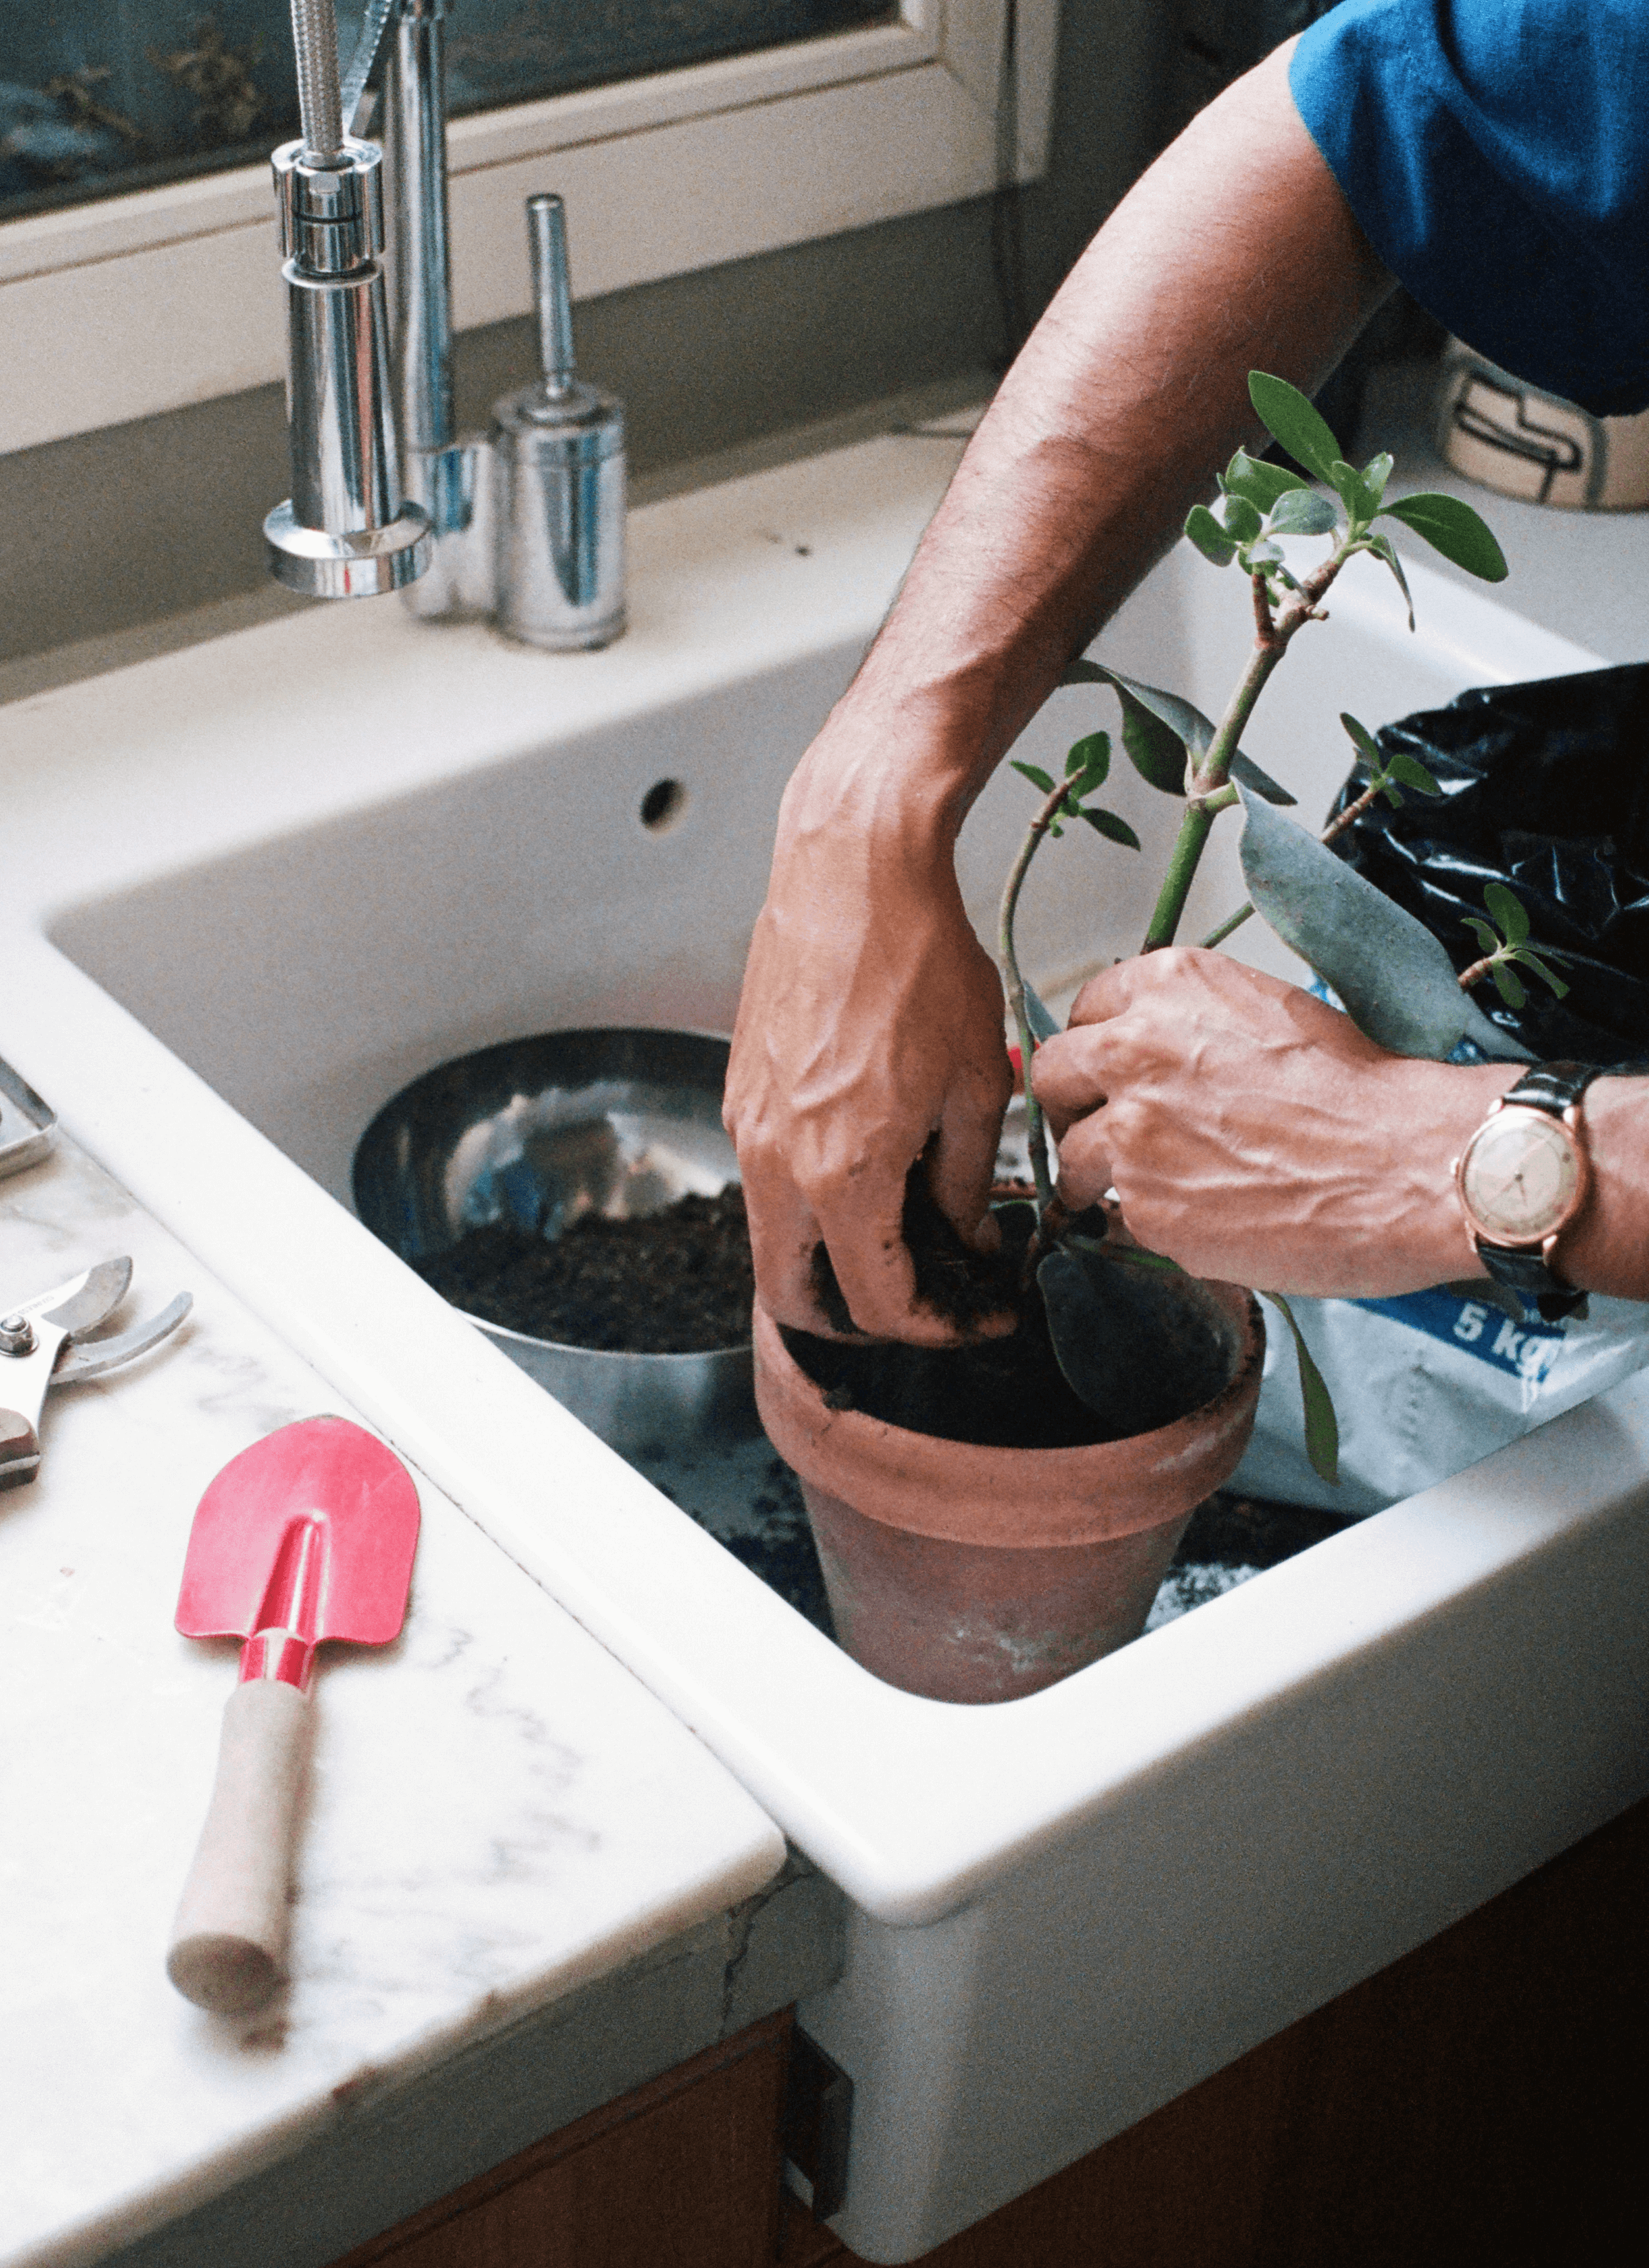 Fred’s pair of hands are busy repotting plants in the sink while there are some gardening tools on the table, including a trowel and a pair of secateurs.